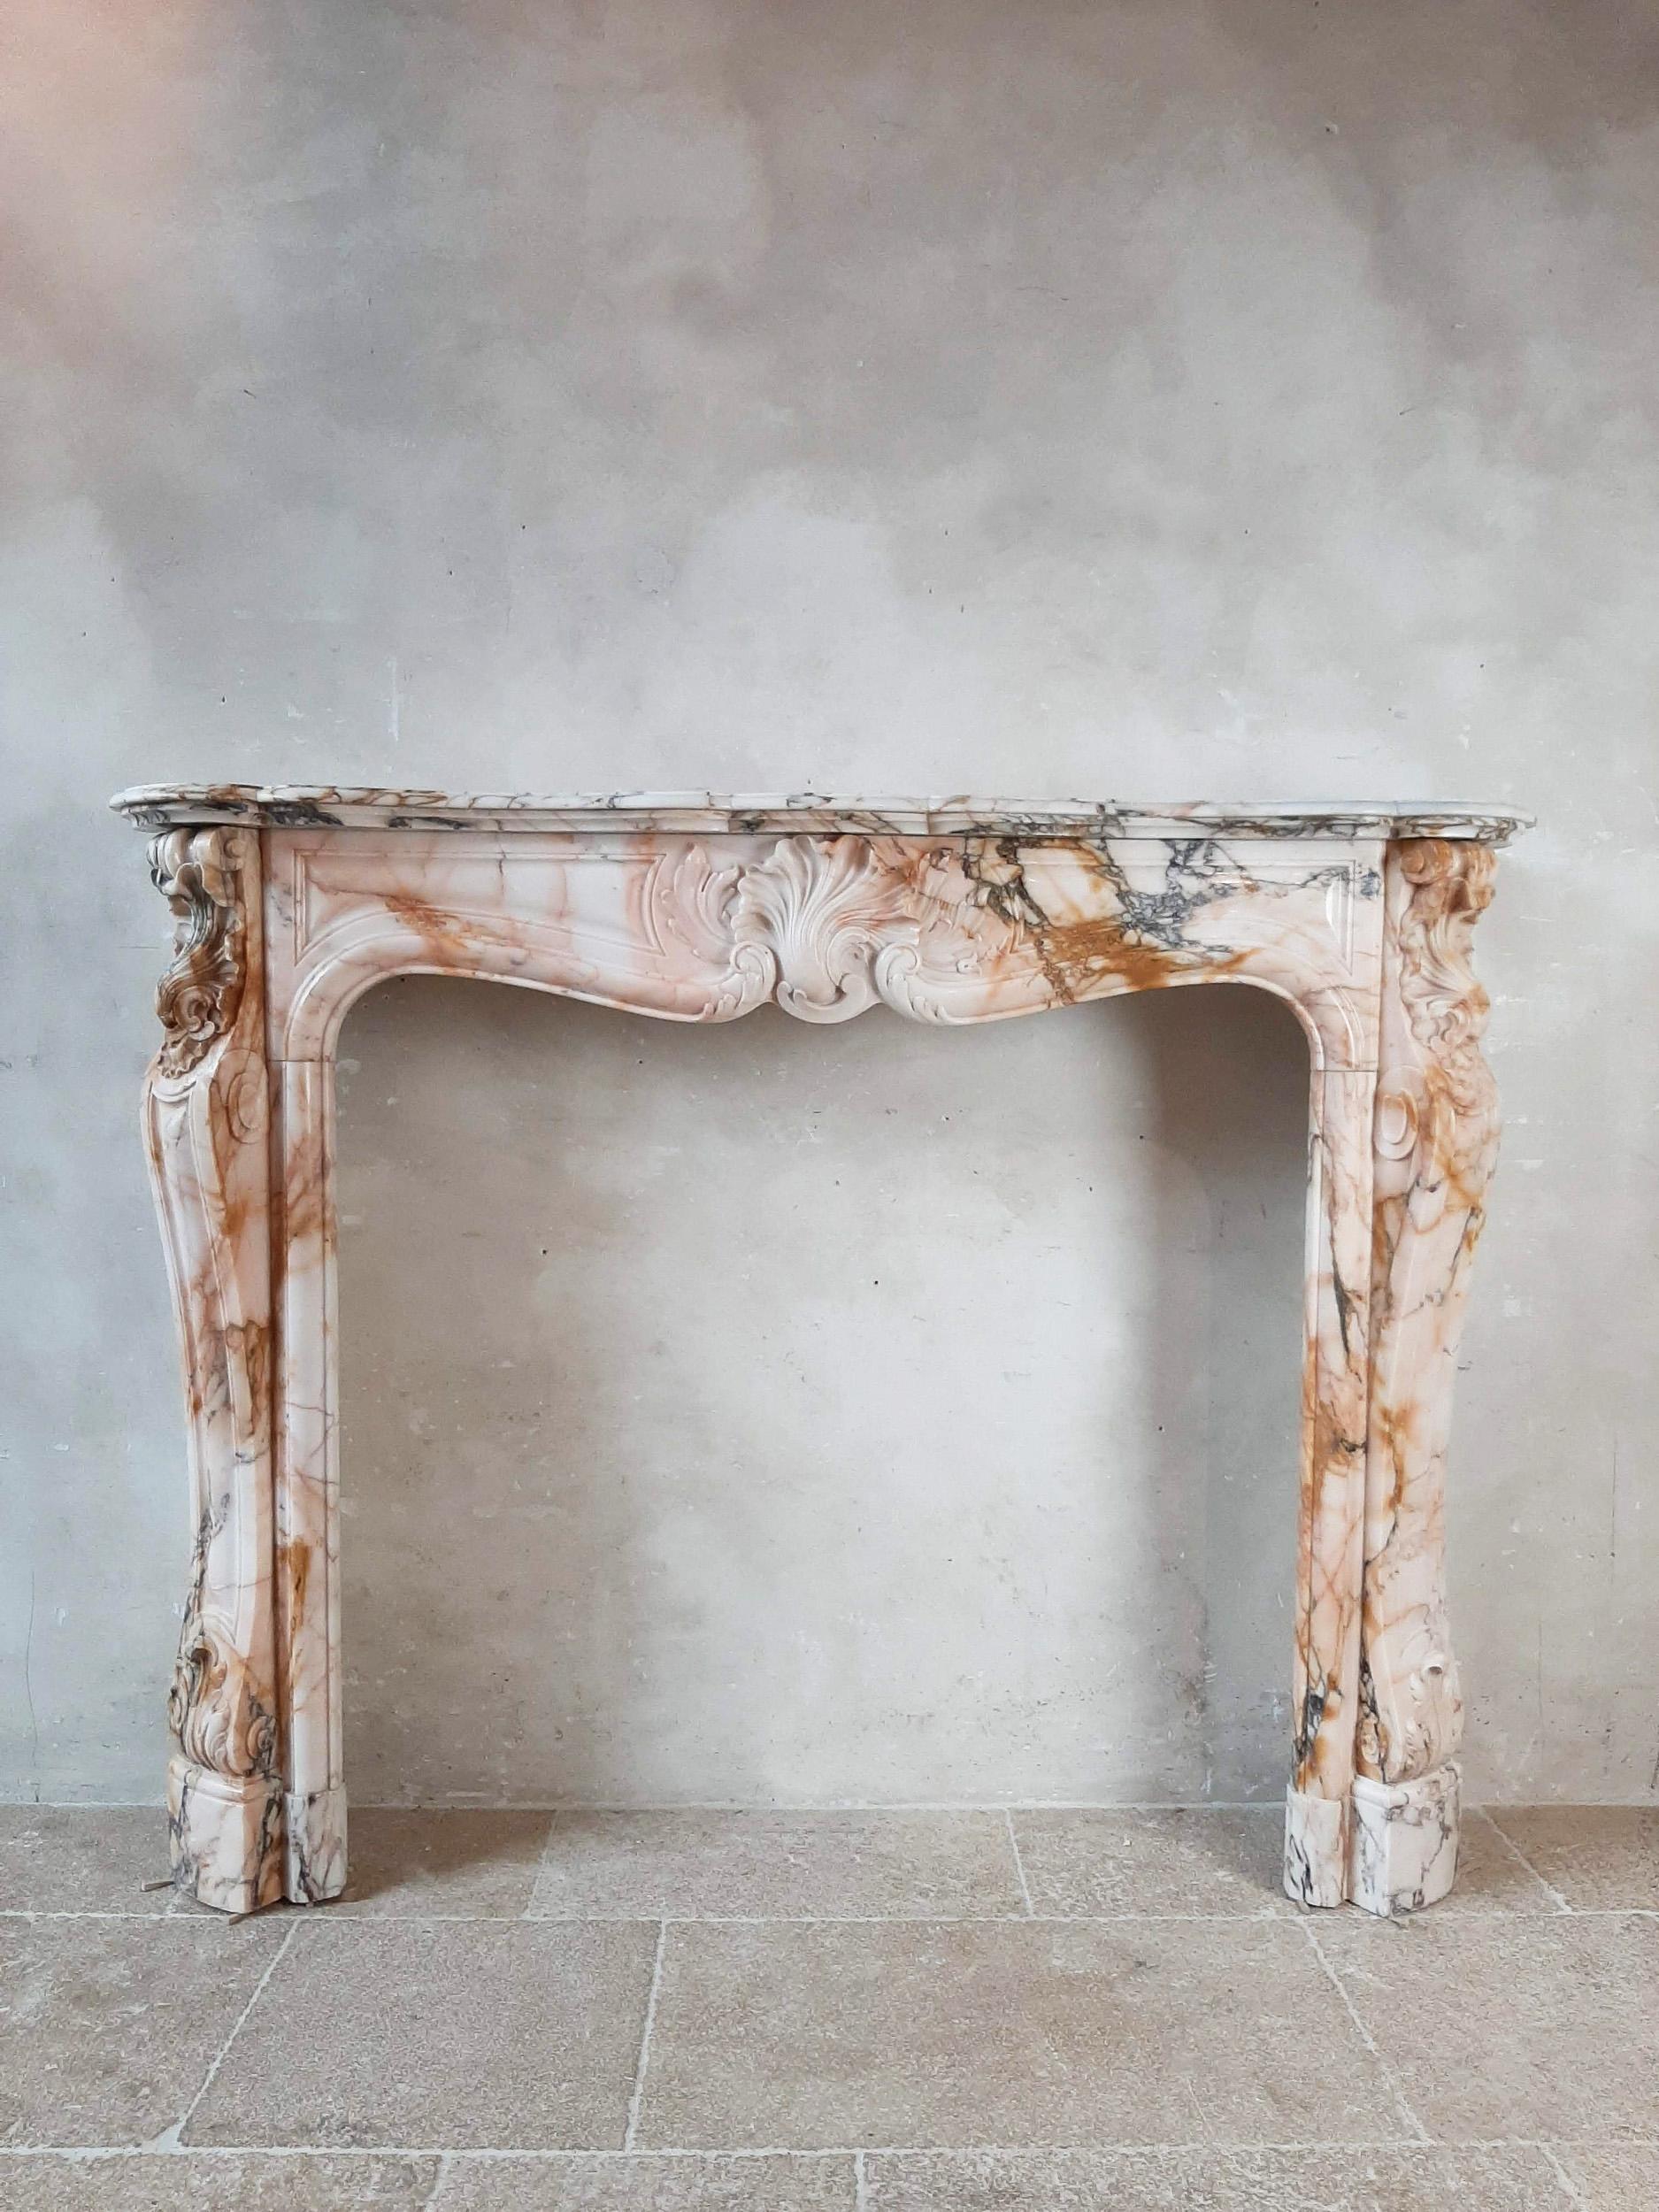 Antique French marble Trois coquilles fireplace in Louis XV style. The marble in a beautiful soft pink shade, with gray and cognac-colored nuances. Richly carved 19th century fireplace decorated with 3 scallops and acanthus leaf.

Dimensions: H